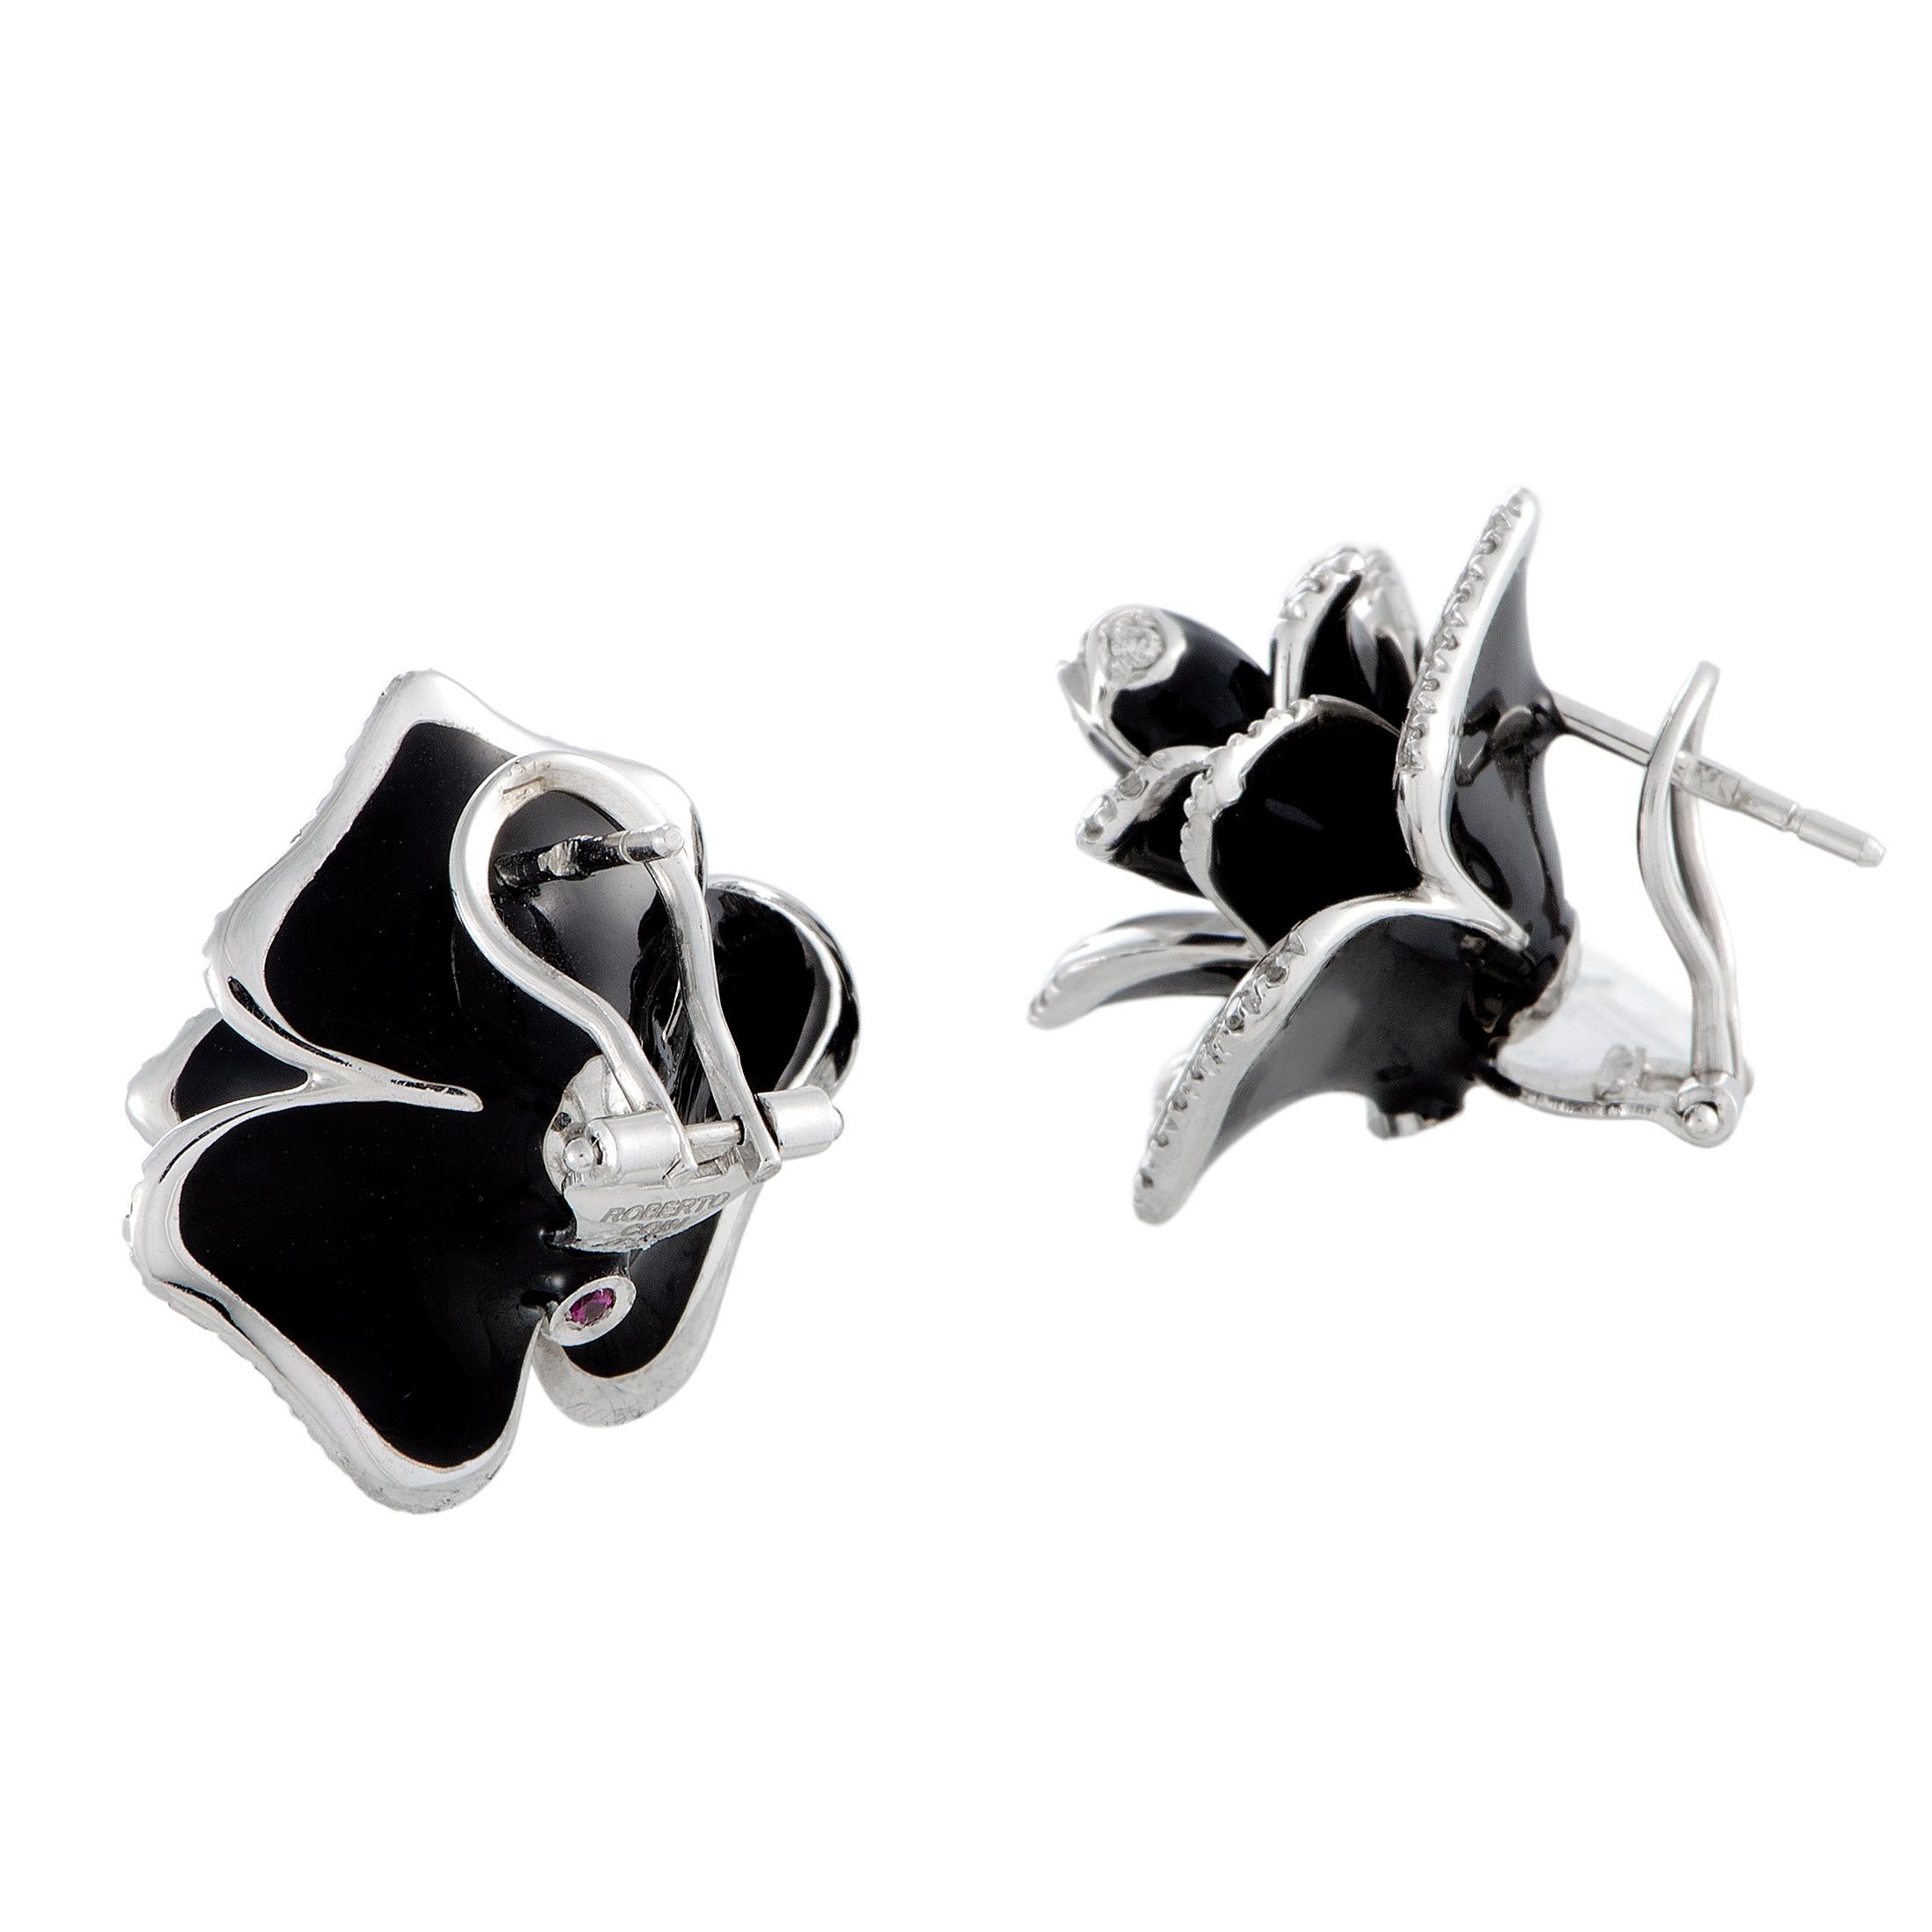 Depicting beautifully stylized flowers in a compellingly luxe fashion, these feminine Roberto Coin earrings will add a charming touch to any ensemble of yours. The pair is made of elegant 18K white gold, decorated with black enamel and with